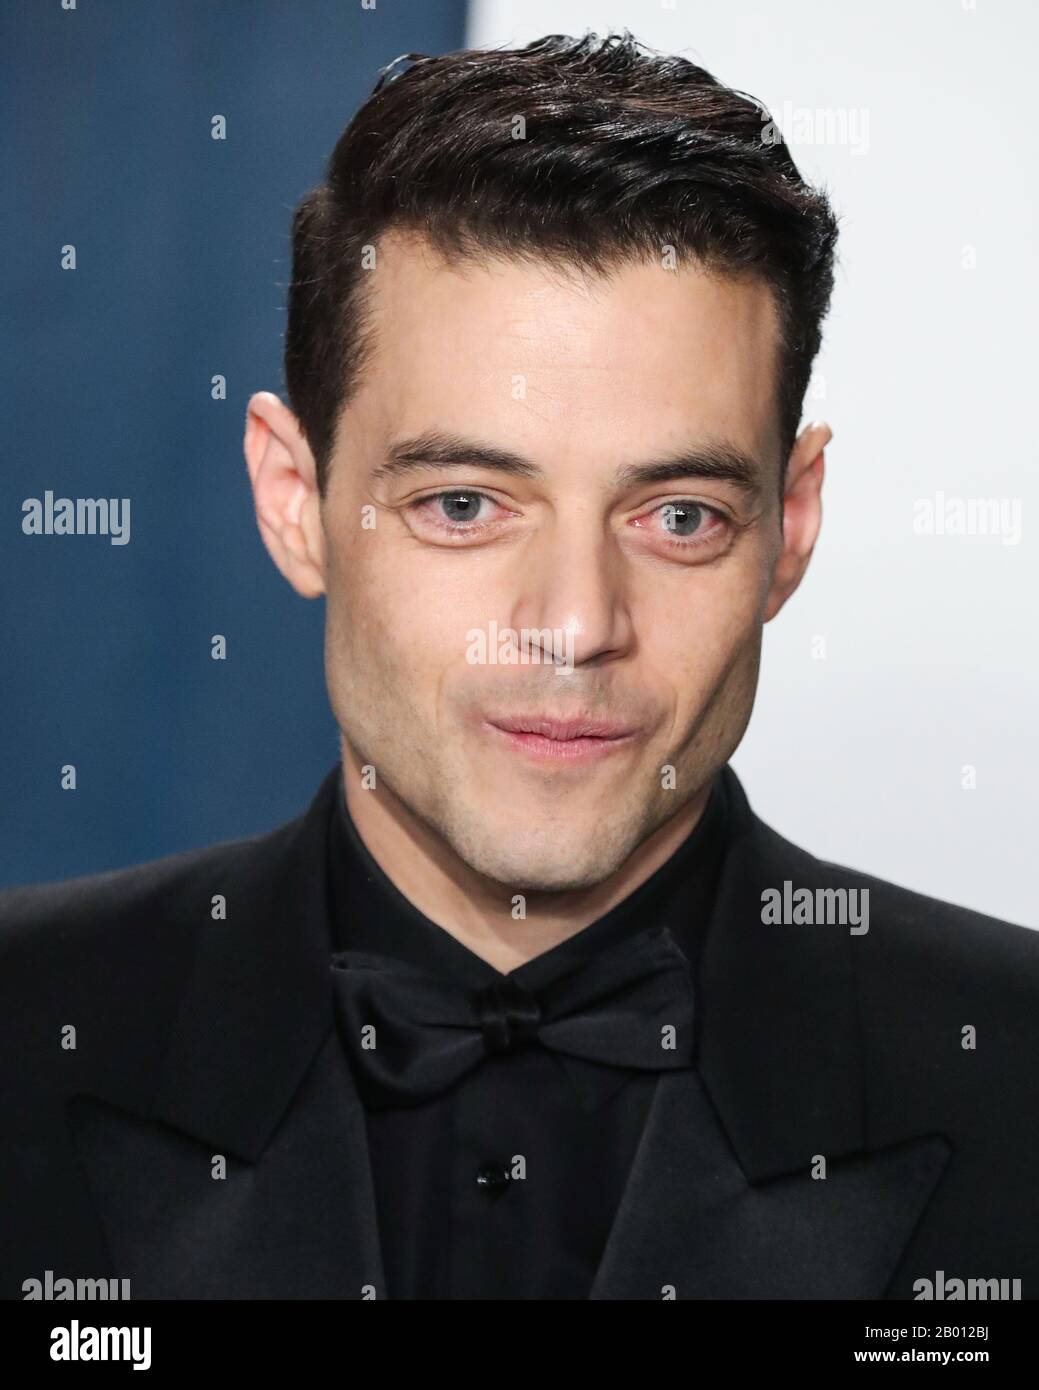 BEVERLY HILLS, LOS ANGELES, CALIFORNIA, USA - FEBRUARY 09: Actor Rami Malek  arrives at the 2020 Vanity Fair Oscar Party held at the Wallis Annenberg  Center for the Performing Arts on February